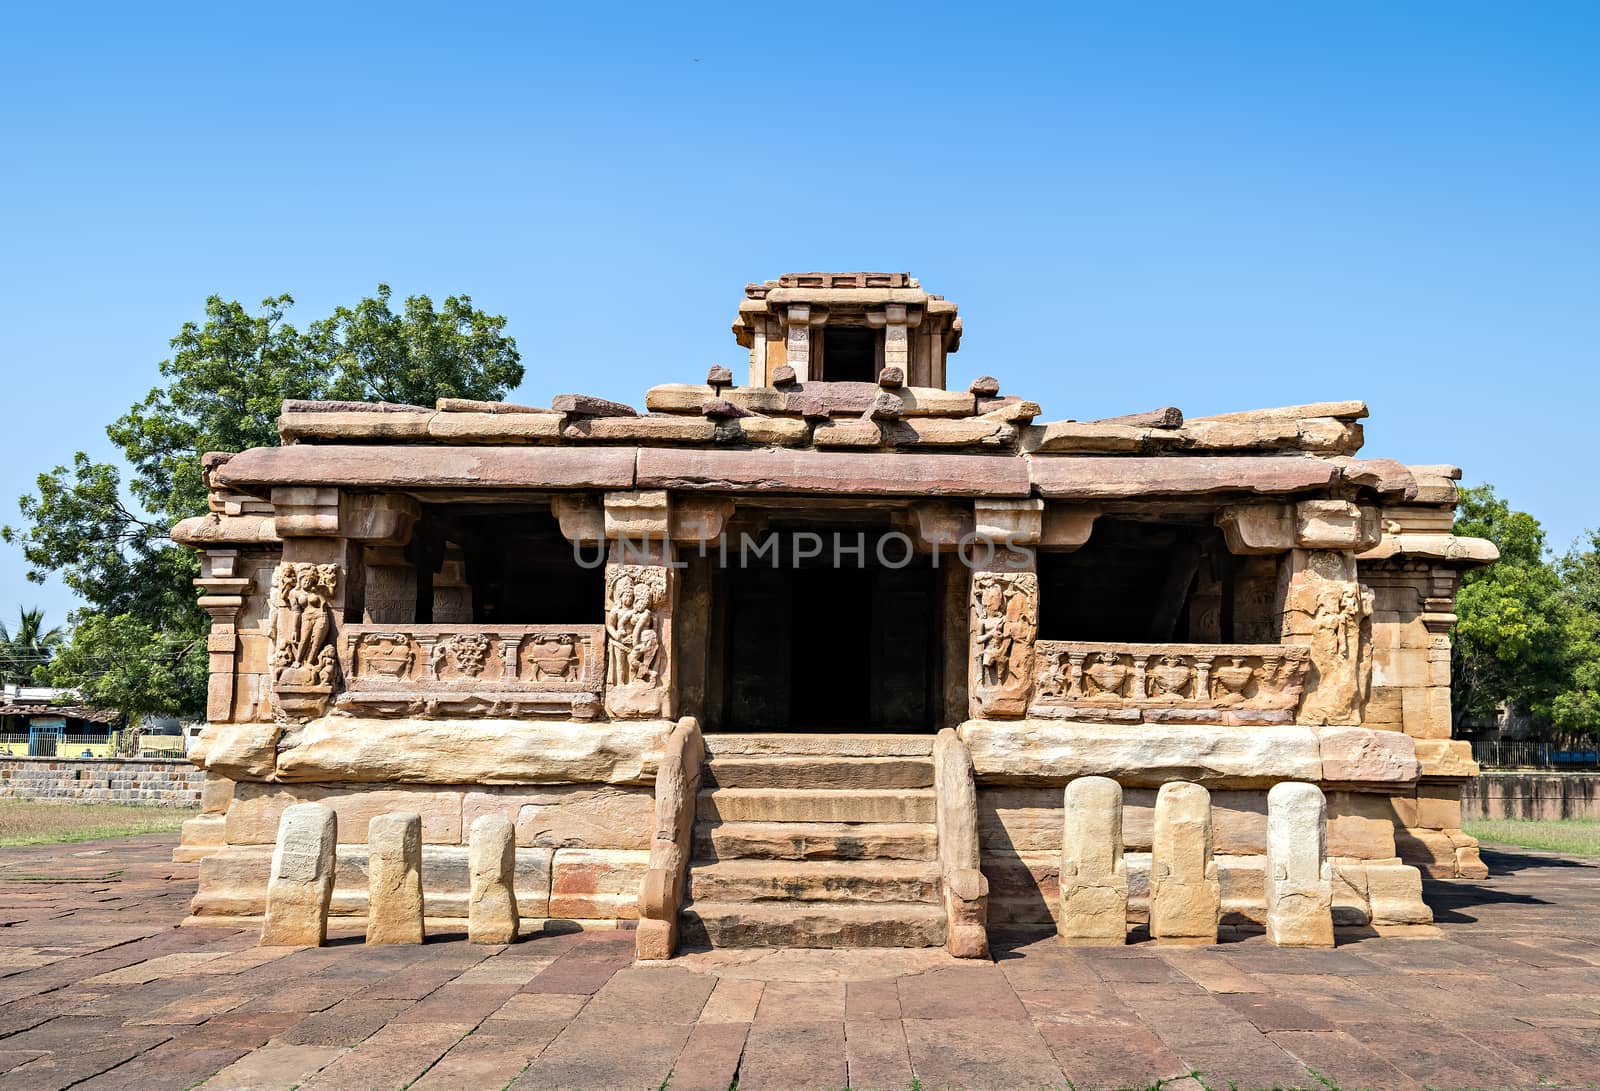 Ancient 8th century carved stone temple of Aihole, Karnataka, India. by lalam